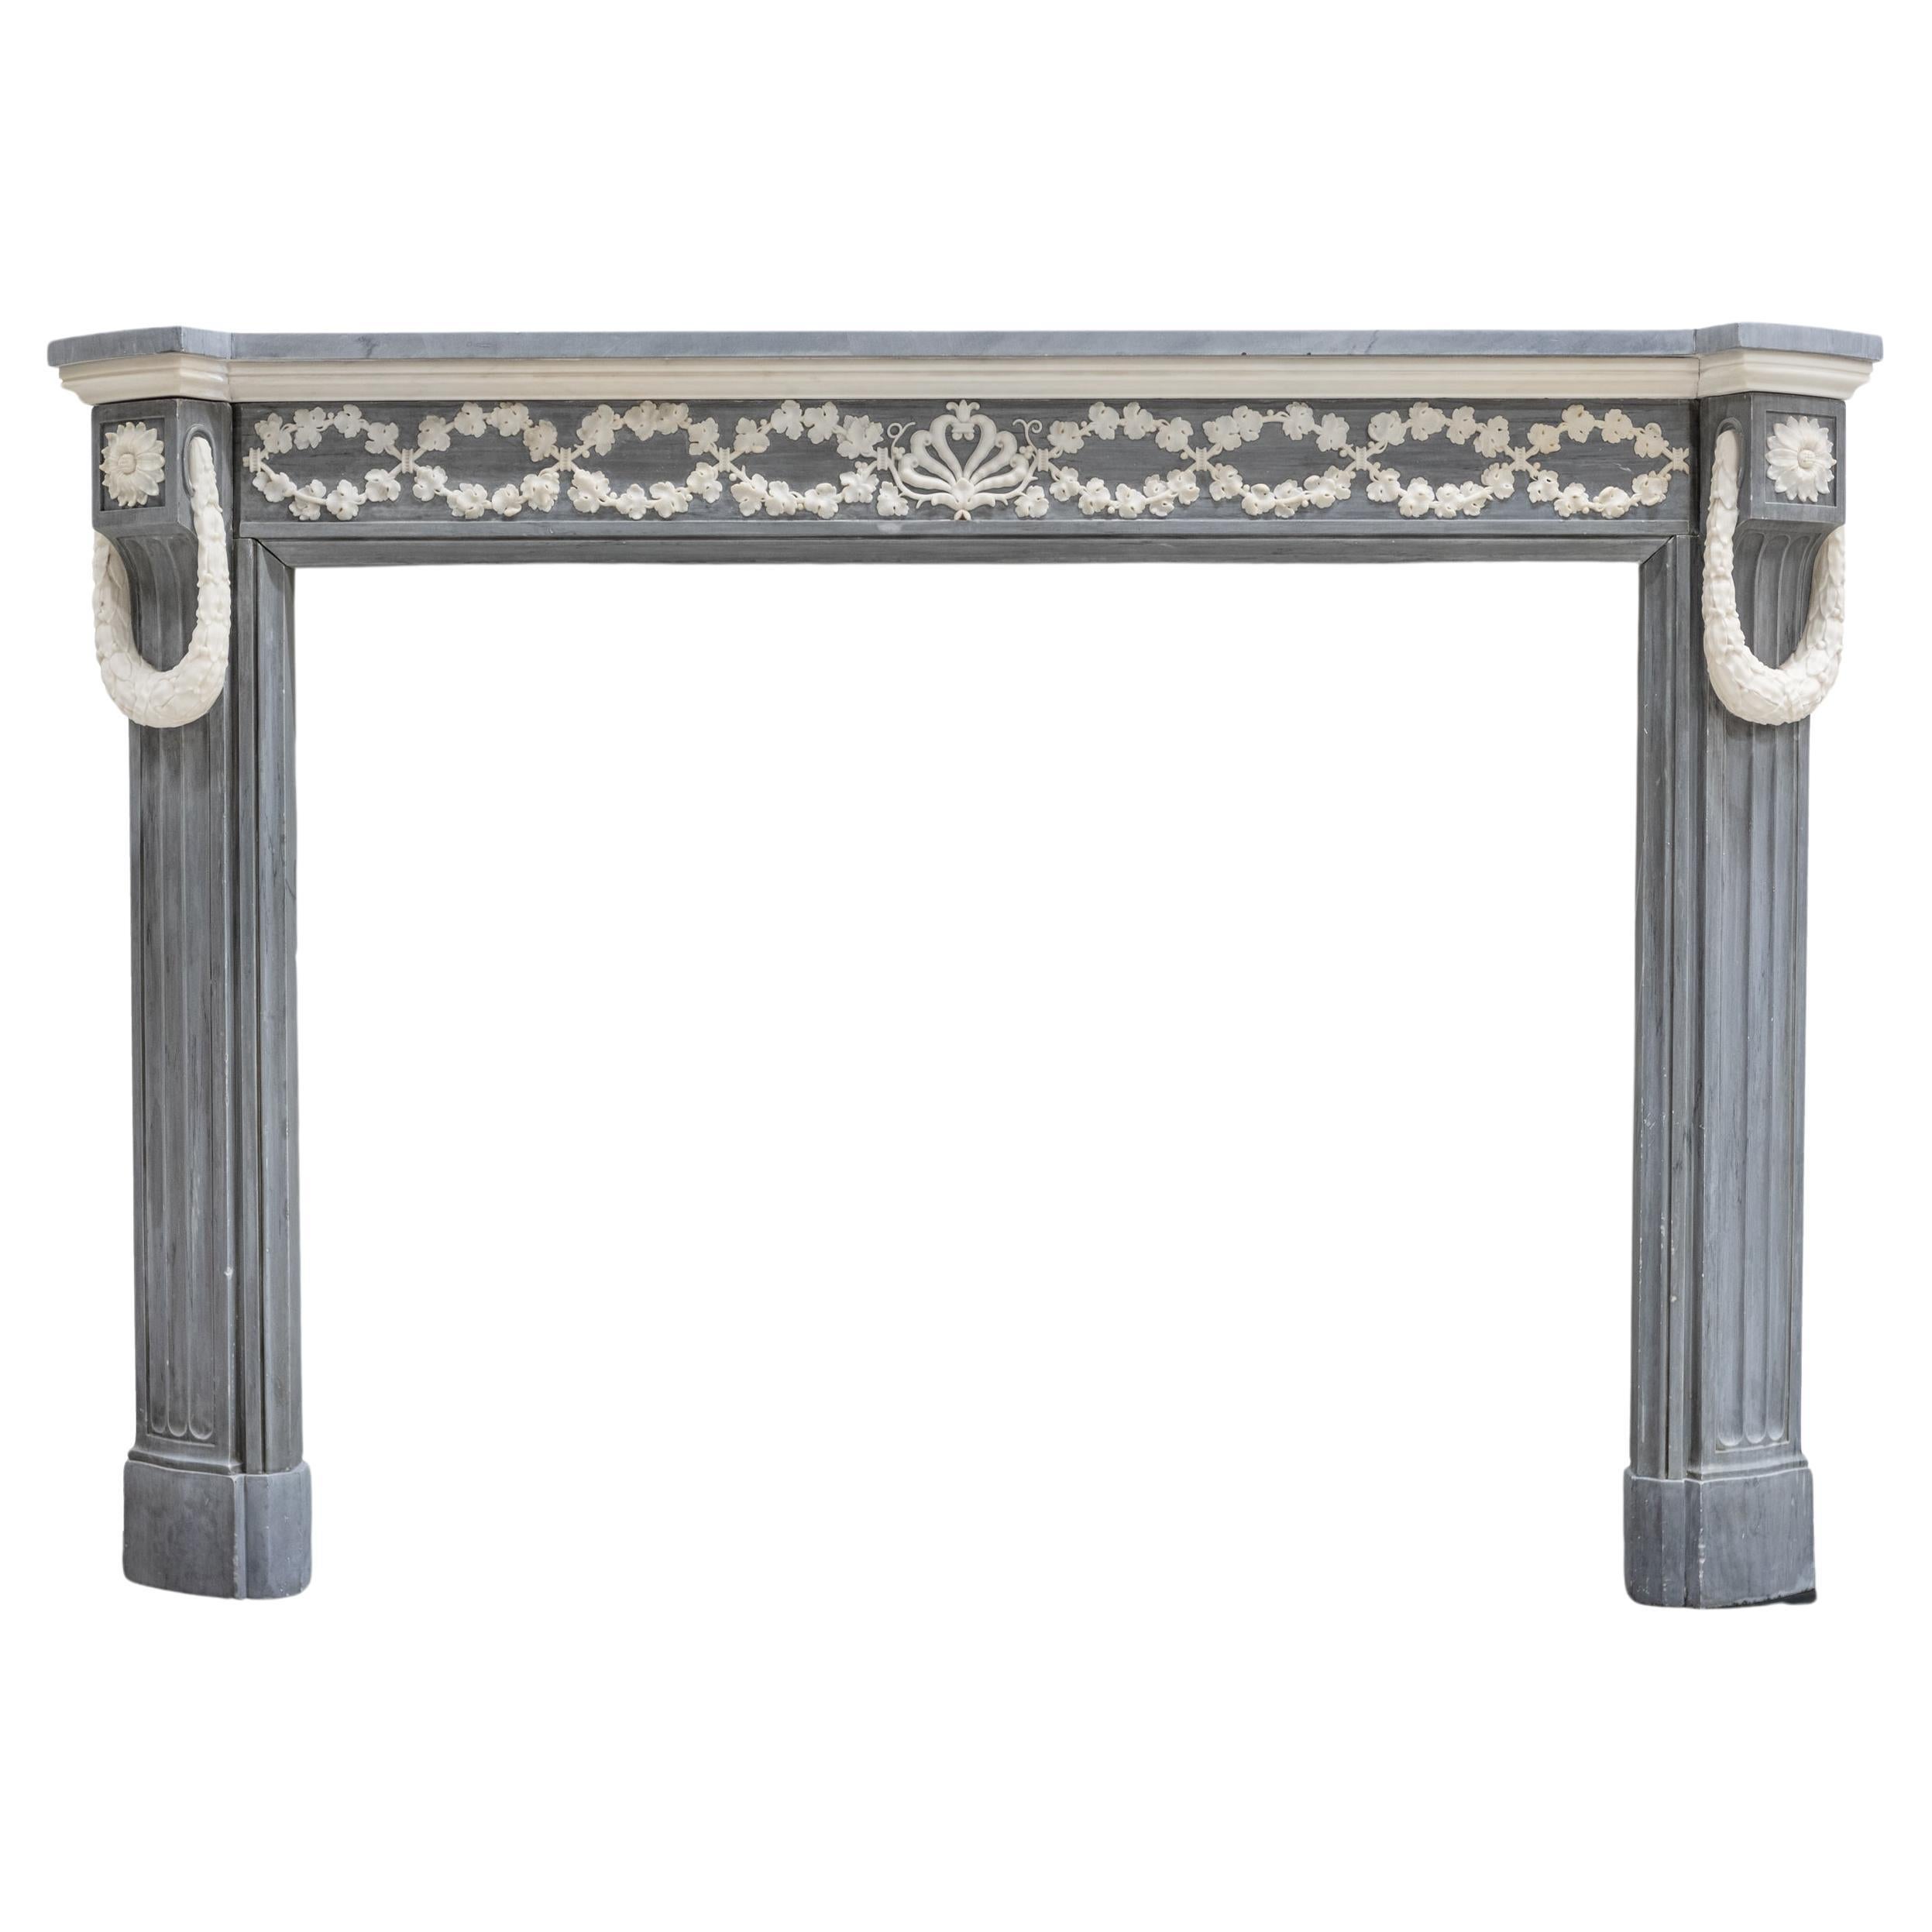 Antique Early 19th Century French Style Grey Marble Fireplace Surround For Sale